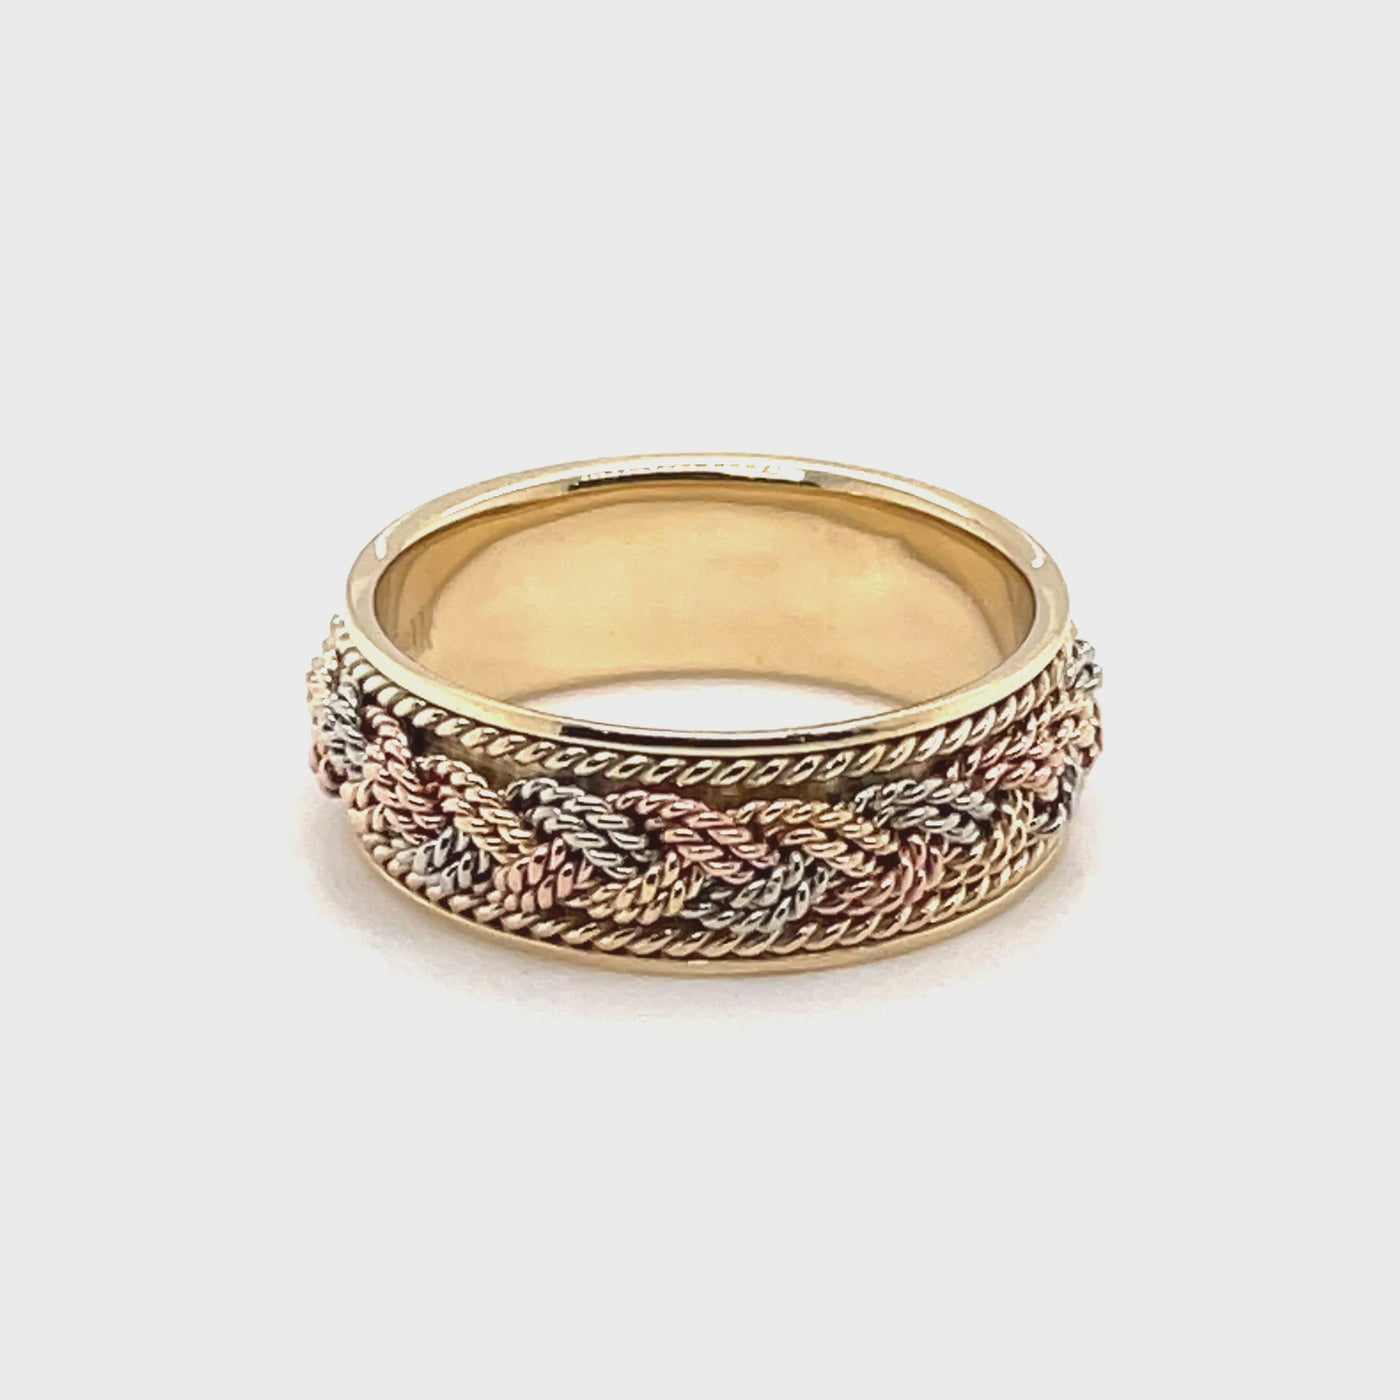 8MM All Rope Hand Braided Tri-Color Gold Wedding Band